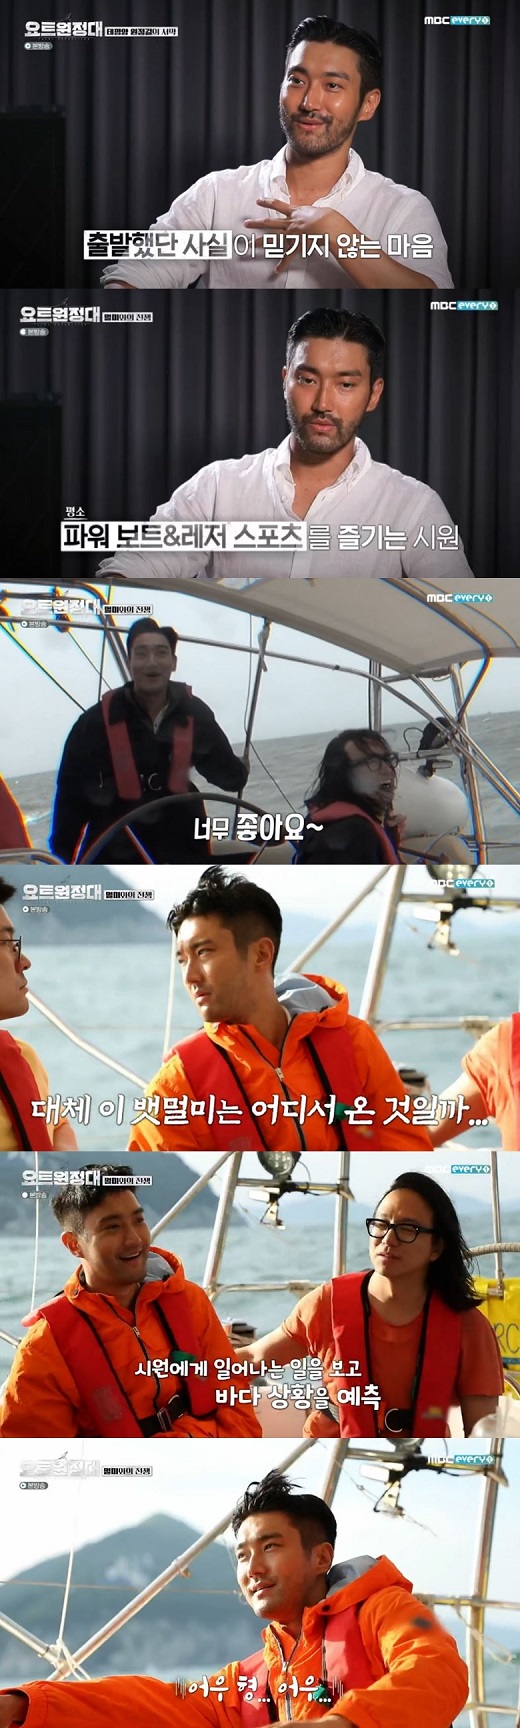 The Yot Expedition opened the prelude to a long journey.On the afternoon of the 24th, cable channel MBC Everlon Yot Expedition finally showed actors Jin Goo, Song Ho Jun, singer and actor Choi Siwon and singer Chang Kiha who left for Pacific Ocean.On this day, Jin Goo was anxious ahead of The Embarkation for Cythera, saying, I was worried about the dark, dark blue waves and the rain.In addition, Choi Siwon showed sudden allergic symptoms and added to his sadness.Chang Kiha then said, If it is atrophied, it is soon to move to the rest of the people.In the midst of the mental distress of Jin Goo, the shiwon became more and more prominent. The sign room that put on the yacht with many worries.The crew members who faced the ship that will be the home of the Yot Expedition for three weeks prepared the full-scale Embarkation for Cythera by moving the net for fruit storage and hoisting the Taegeukgi.The ship left Geoje Island to find the South Cross. Song said, There was a sense of excitement, but I was determined to get strength.As the hull continued to shake, Positive King Choi Siwon also picked up the white flag, saying, I think Im here. He steals tears and says, I enjoyed a power boat and prefer leisure sports.I knew there would be really no seasickness, I vomited five times, said Jin Goo, who, unlike Choi Siwon, is Jin Goo Chang Kiha, like a superhuman.I did not have any motion sickness, he said.Early in the morning, Jin Goo was thrilled to see the first sunrise of his life; he spoke to his family on video, saying, I see the first sunrise in 41 years.I sent a picture of the sunrise and my family gave me feedback. My wife has a lot of sleep.I was originally in bed at that time, but I was very worried about me when I was awake at 4:30 am. I know that I have answered that I love and respect. 